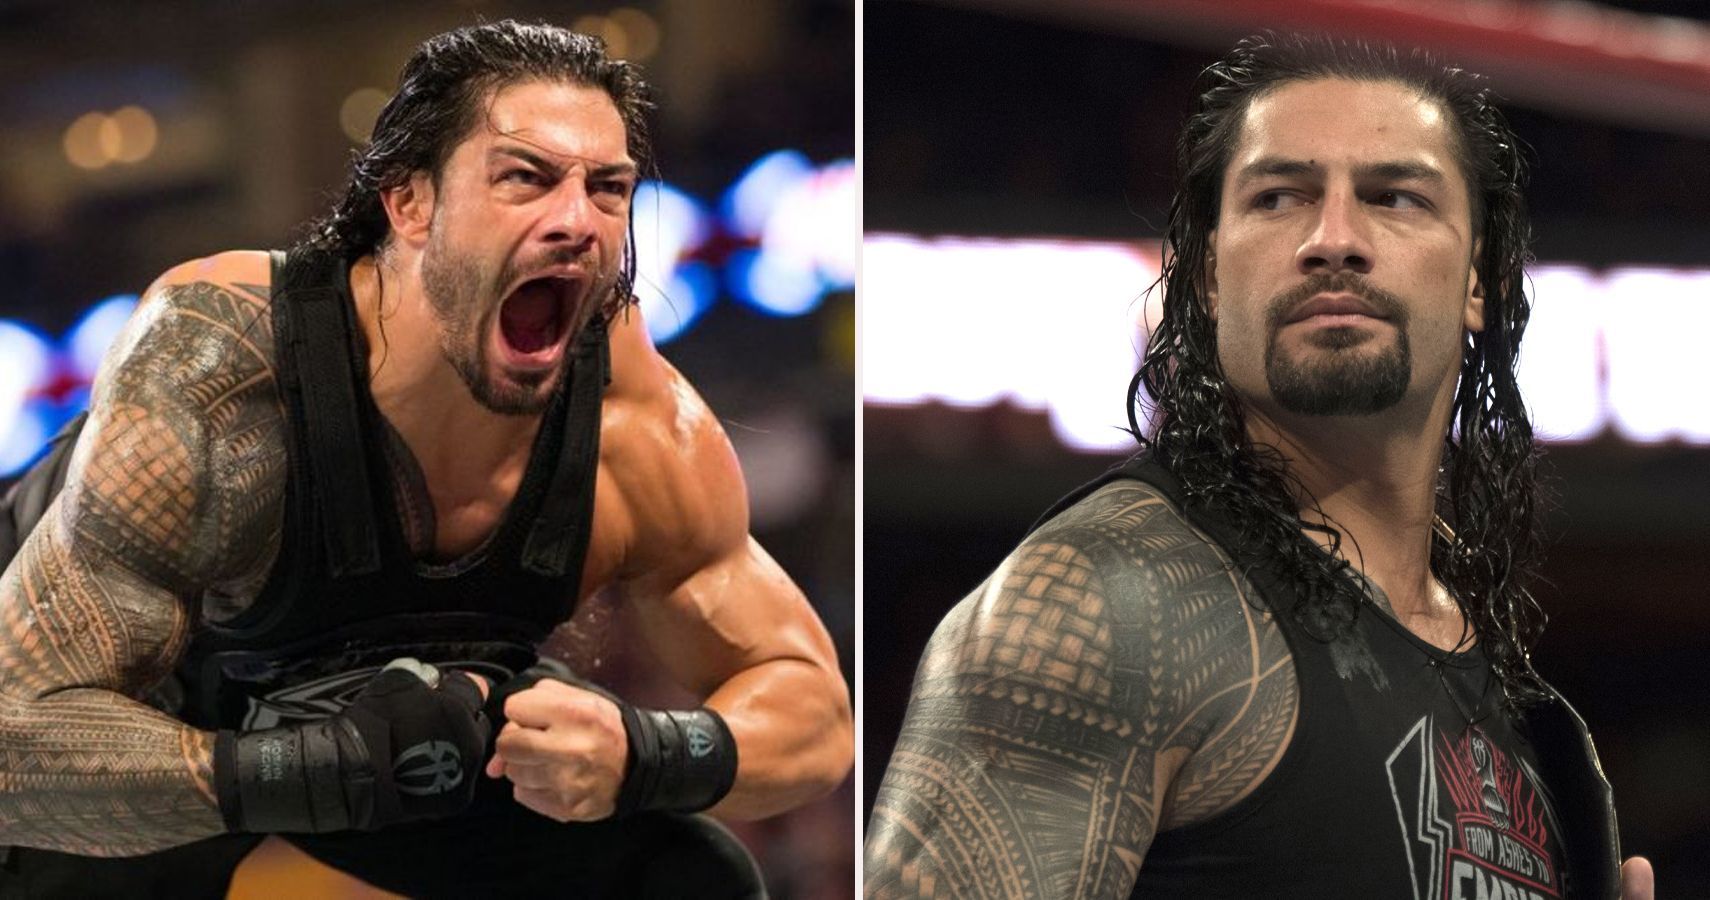 10 Backstage Stories About Roman Reigns We Can't Believe